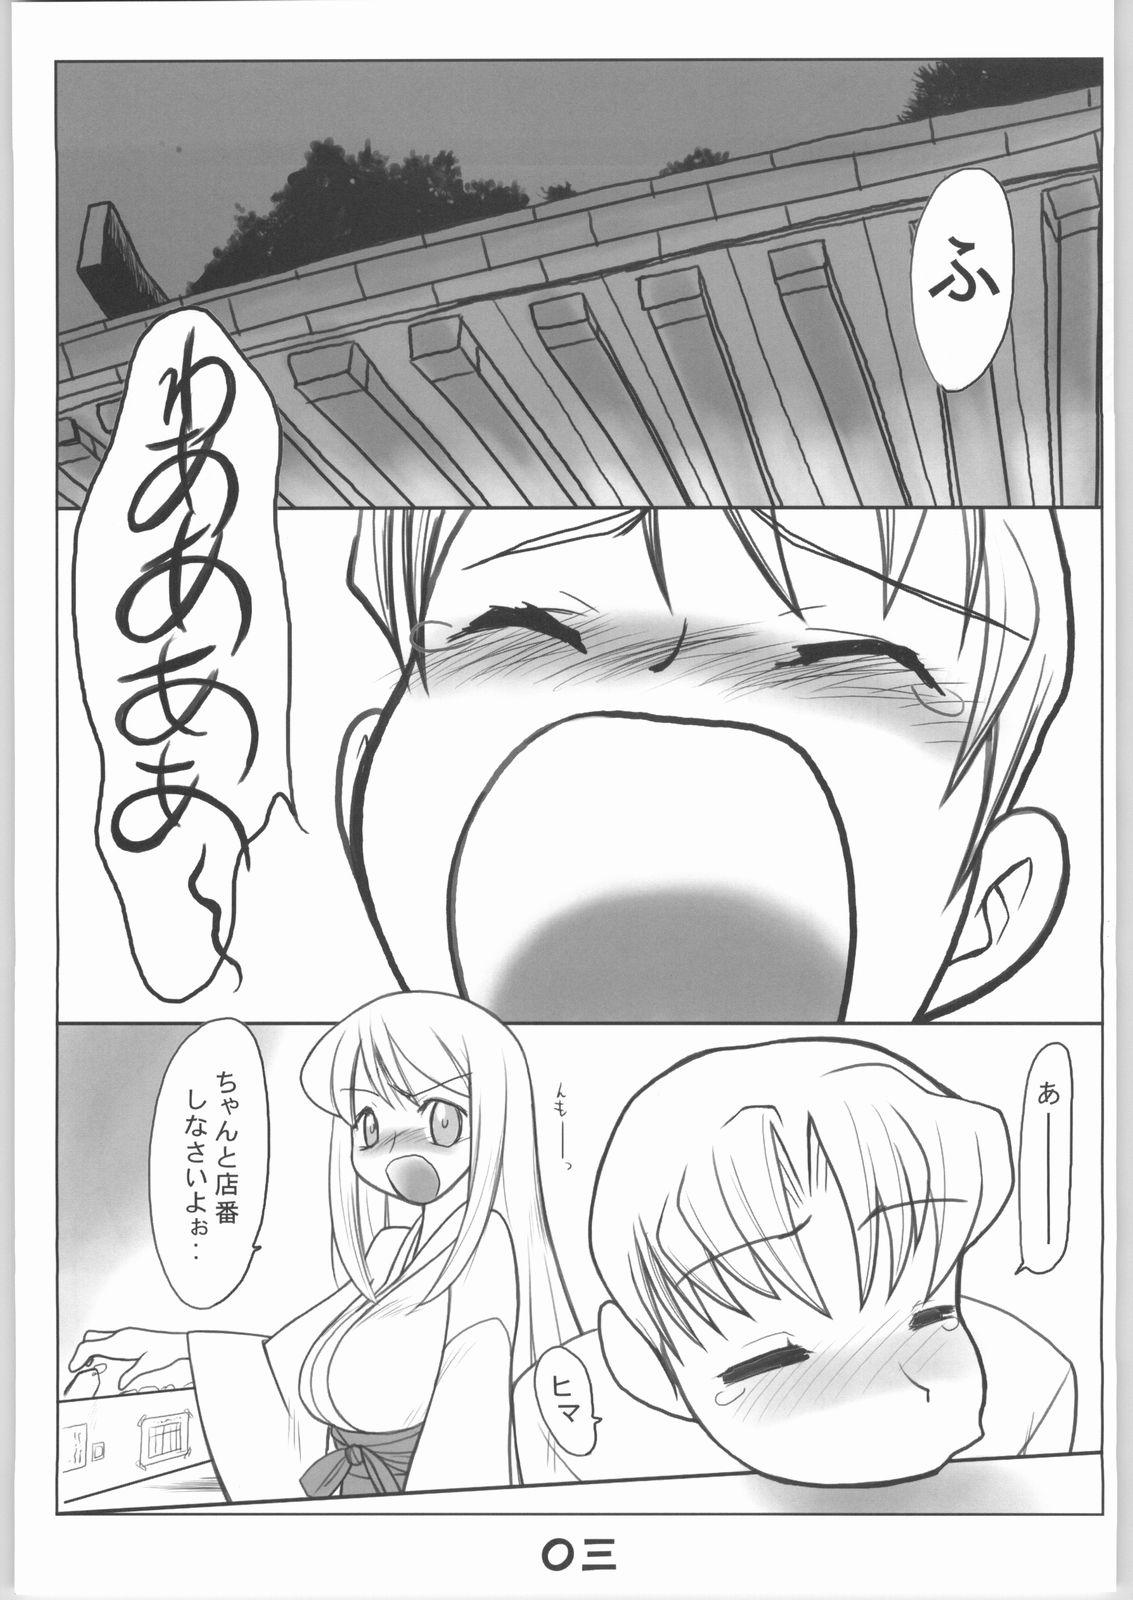 Latex 春告鳥 - The idolmaster Gaystraight - Page 2